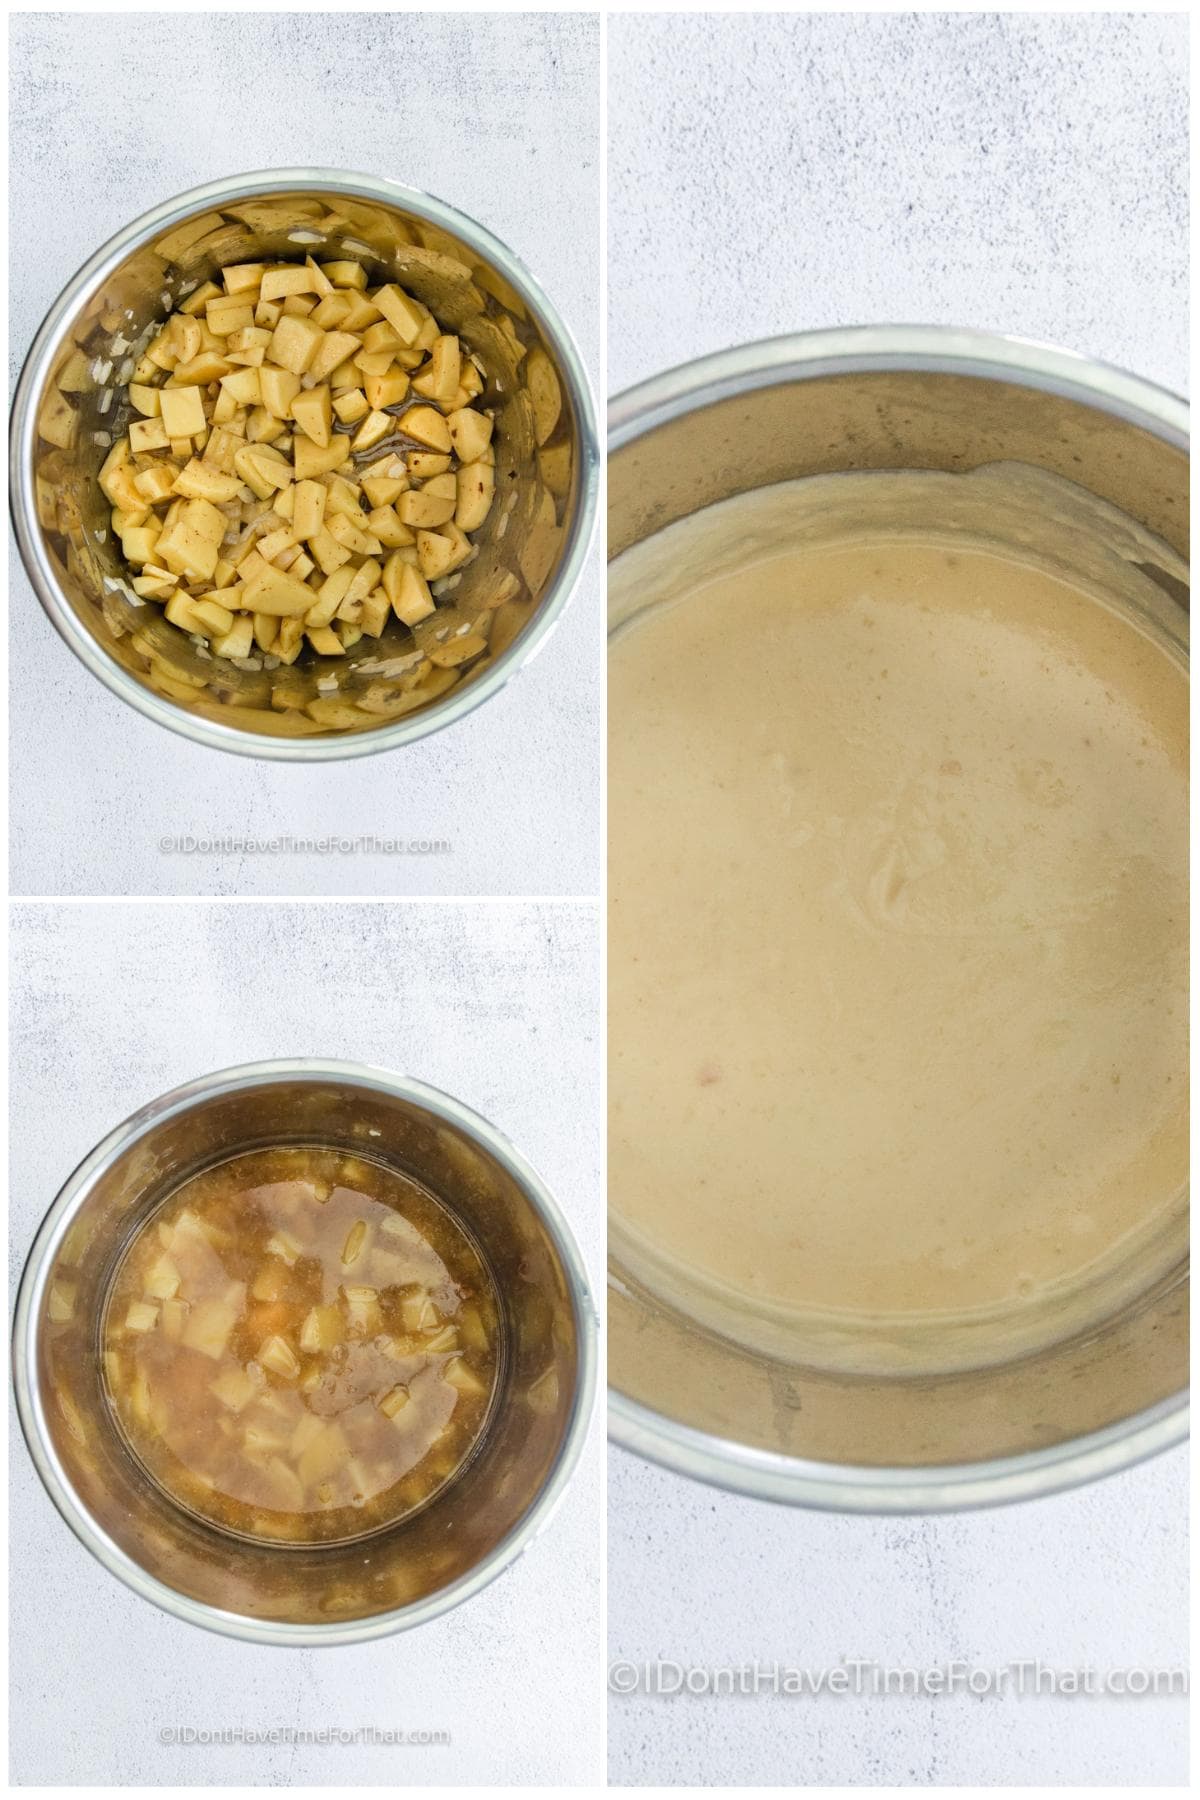 process of adding ingredients together and blending to make Instant Pot Loaded Baked Potato Soup